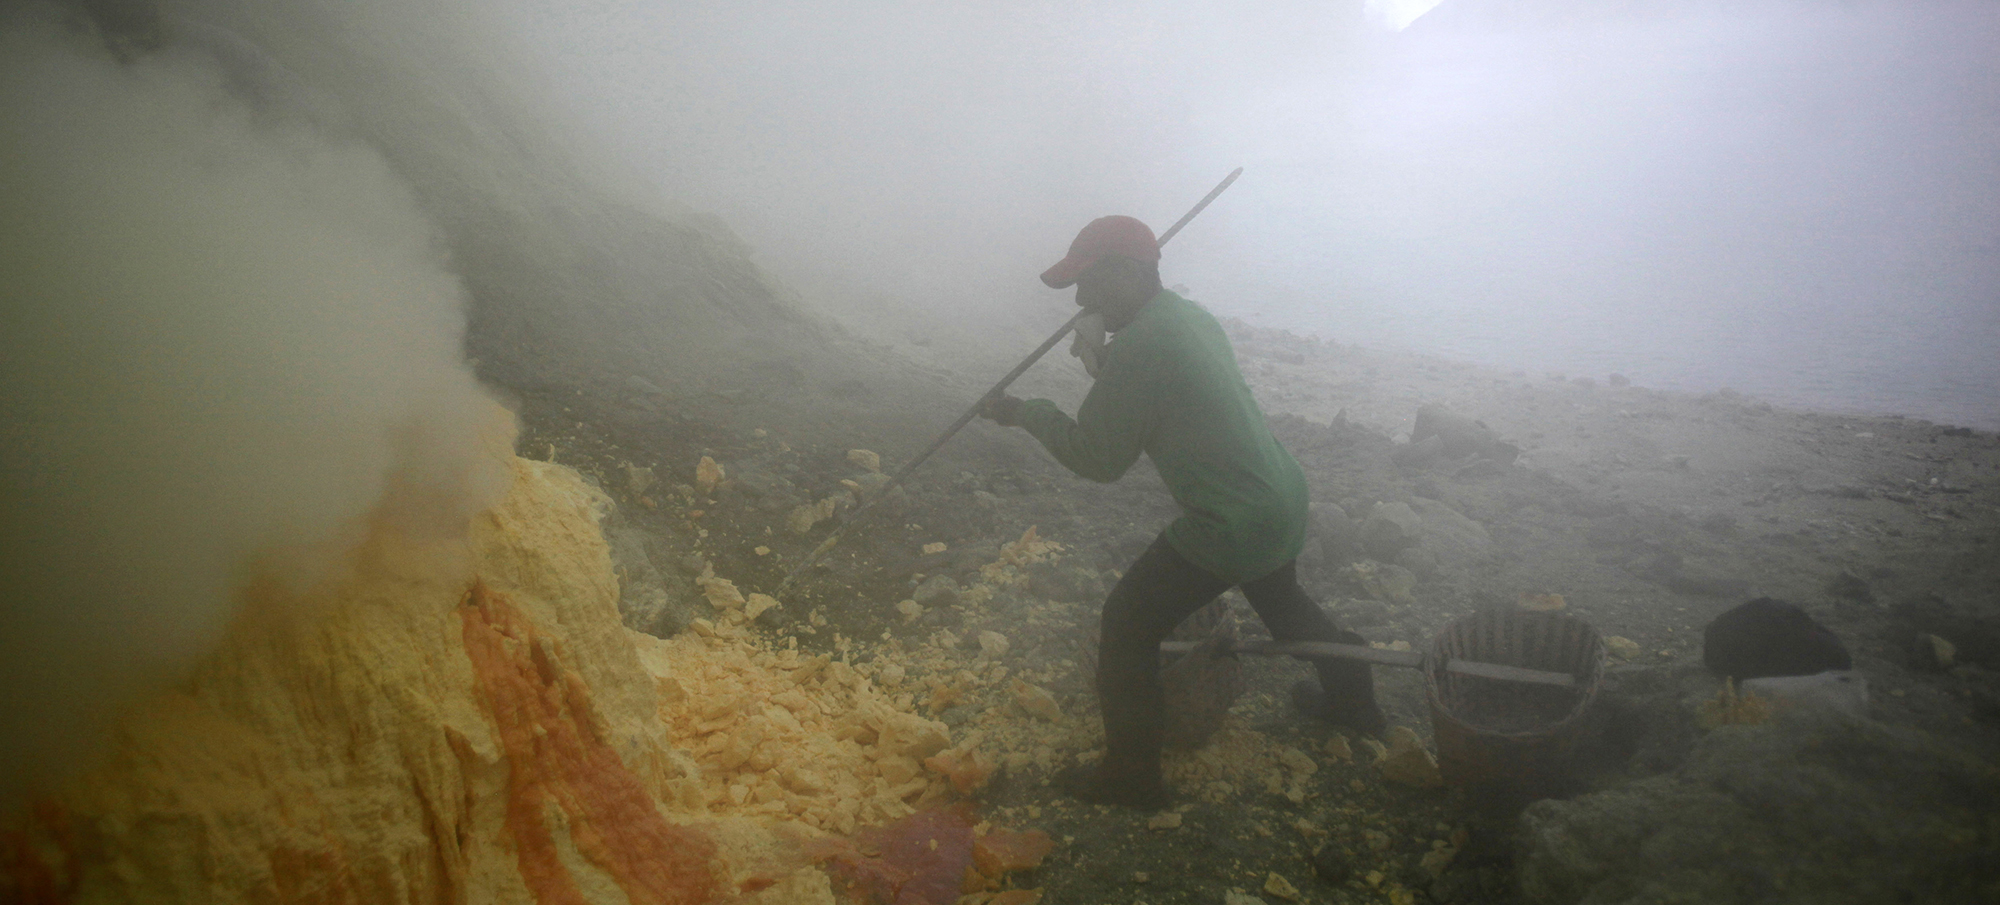 Inside The Toxic Sulphur Quarries That Keep Your Tyres Rolling